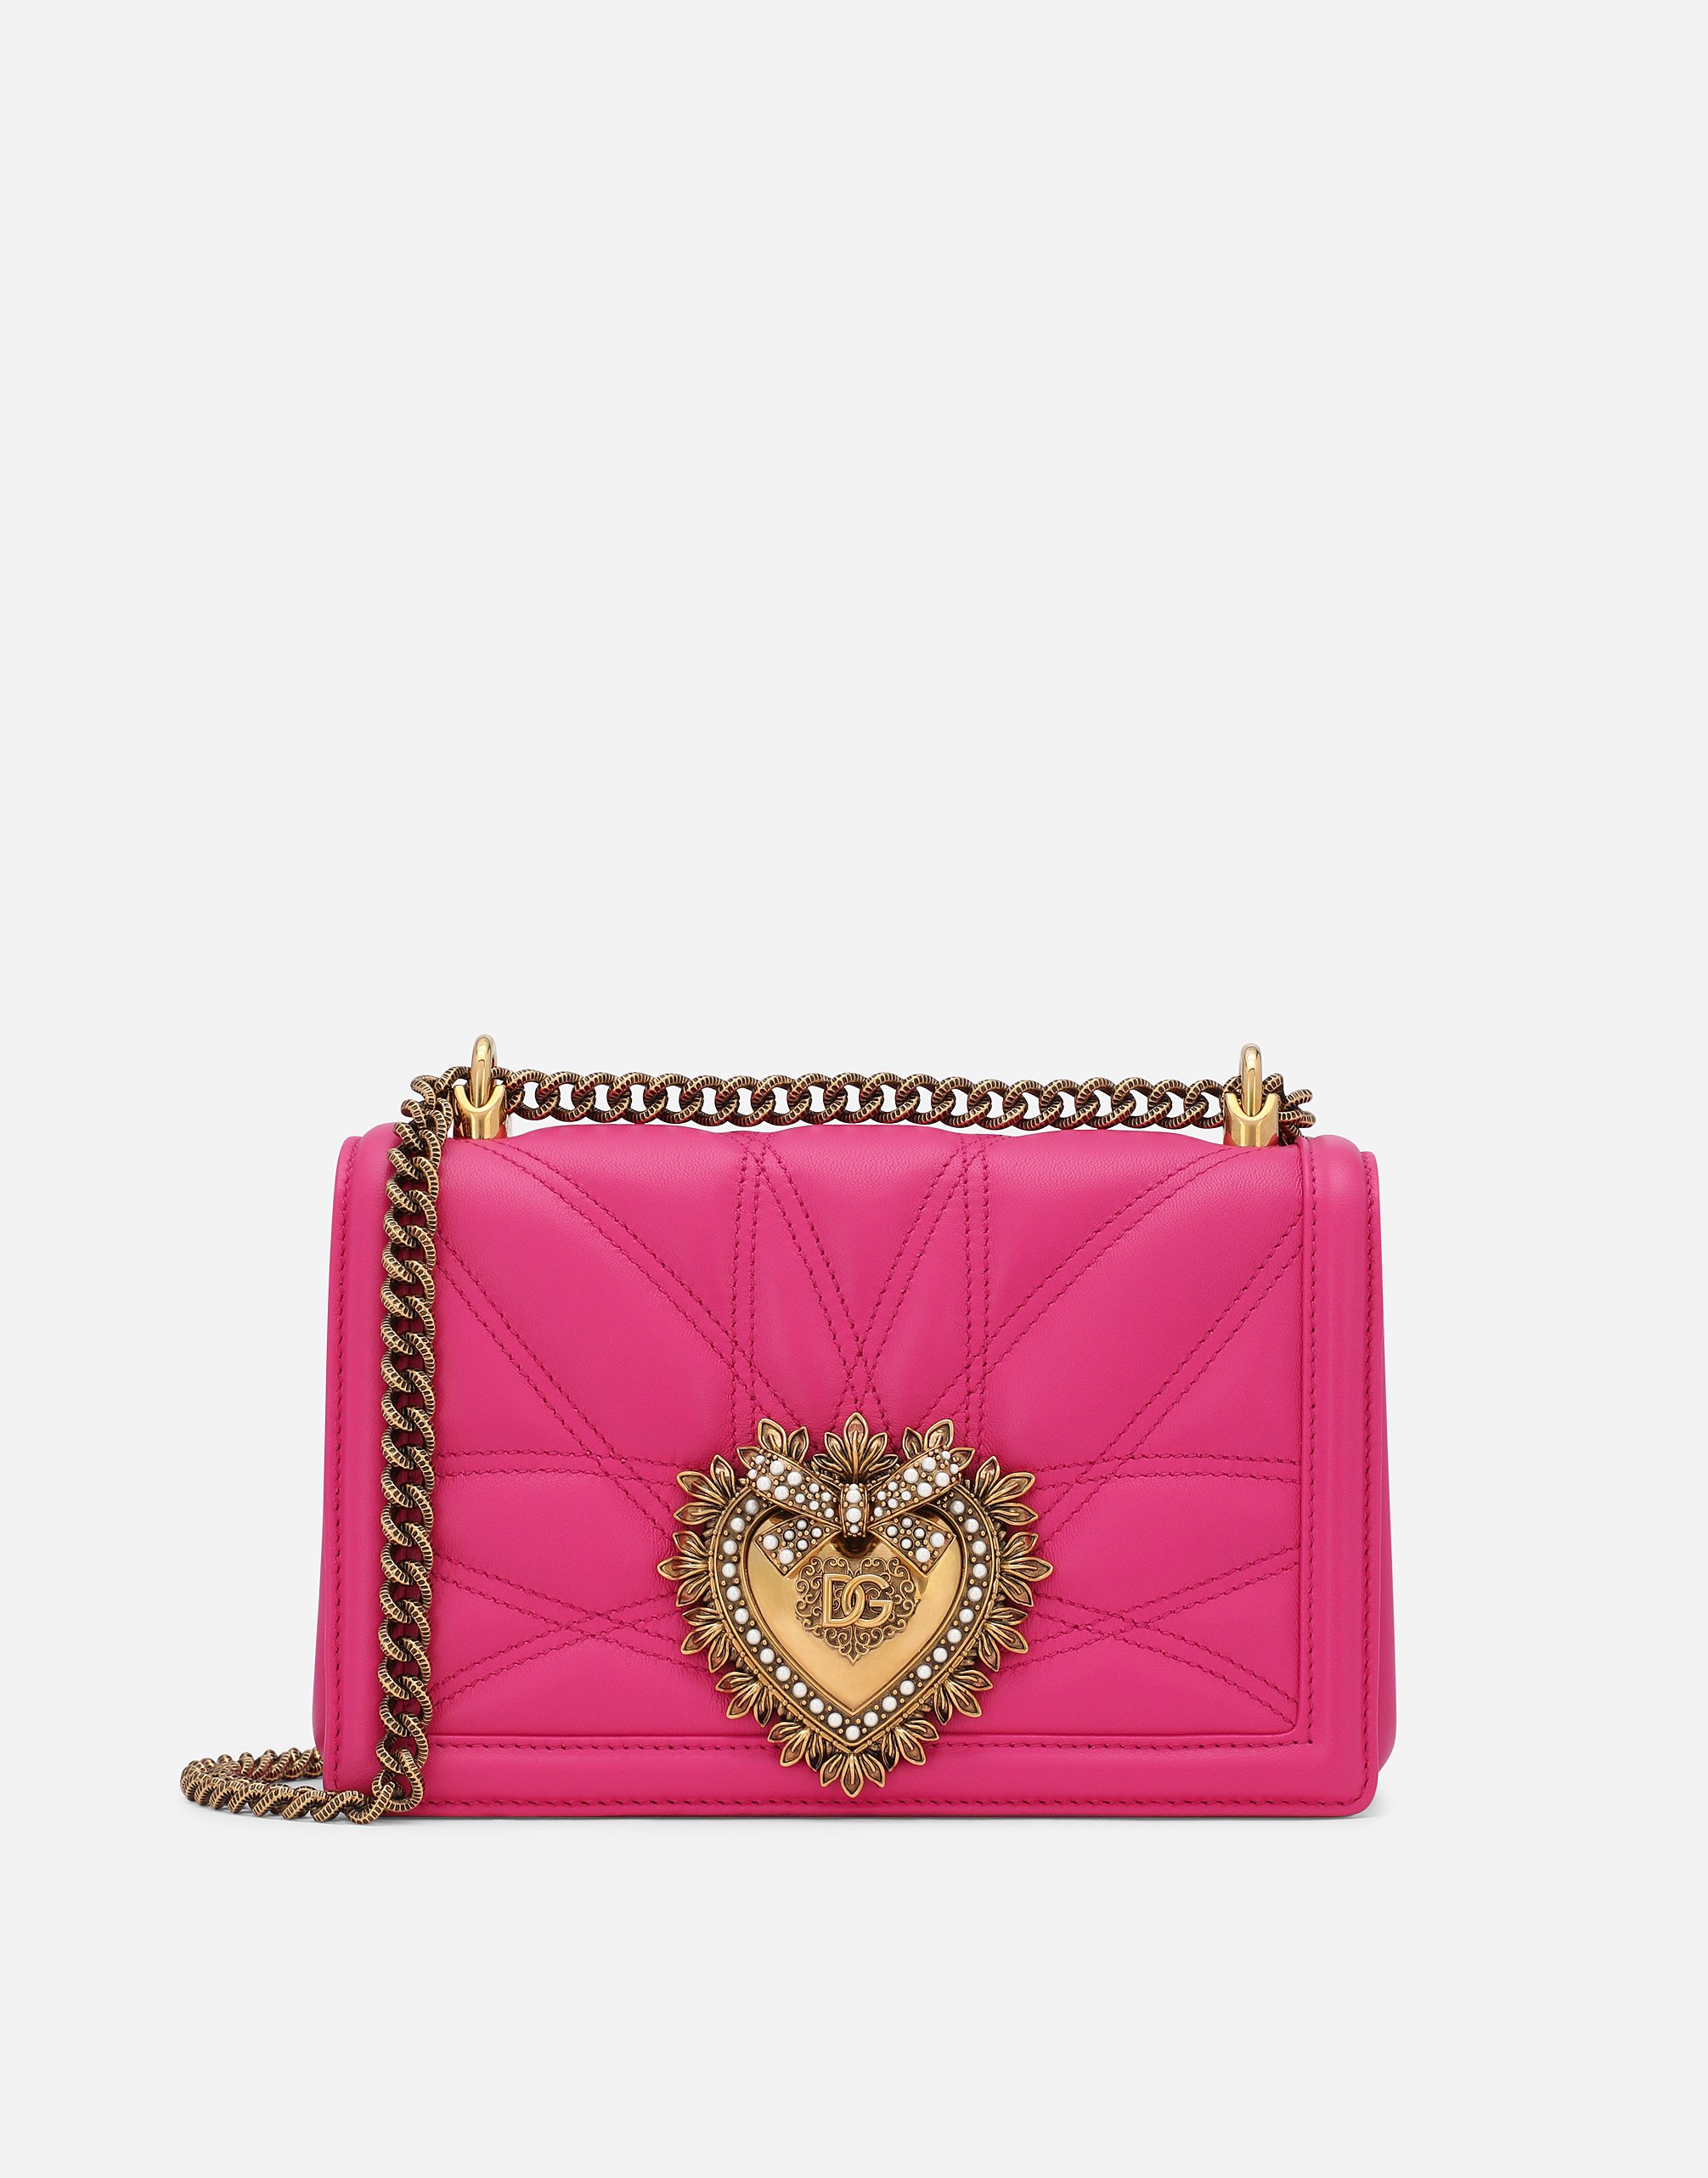 Dolce & Gabbana Medium Devotion Bag In Quilted Nappa Leather In Pink